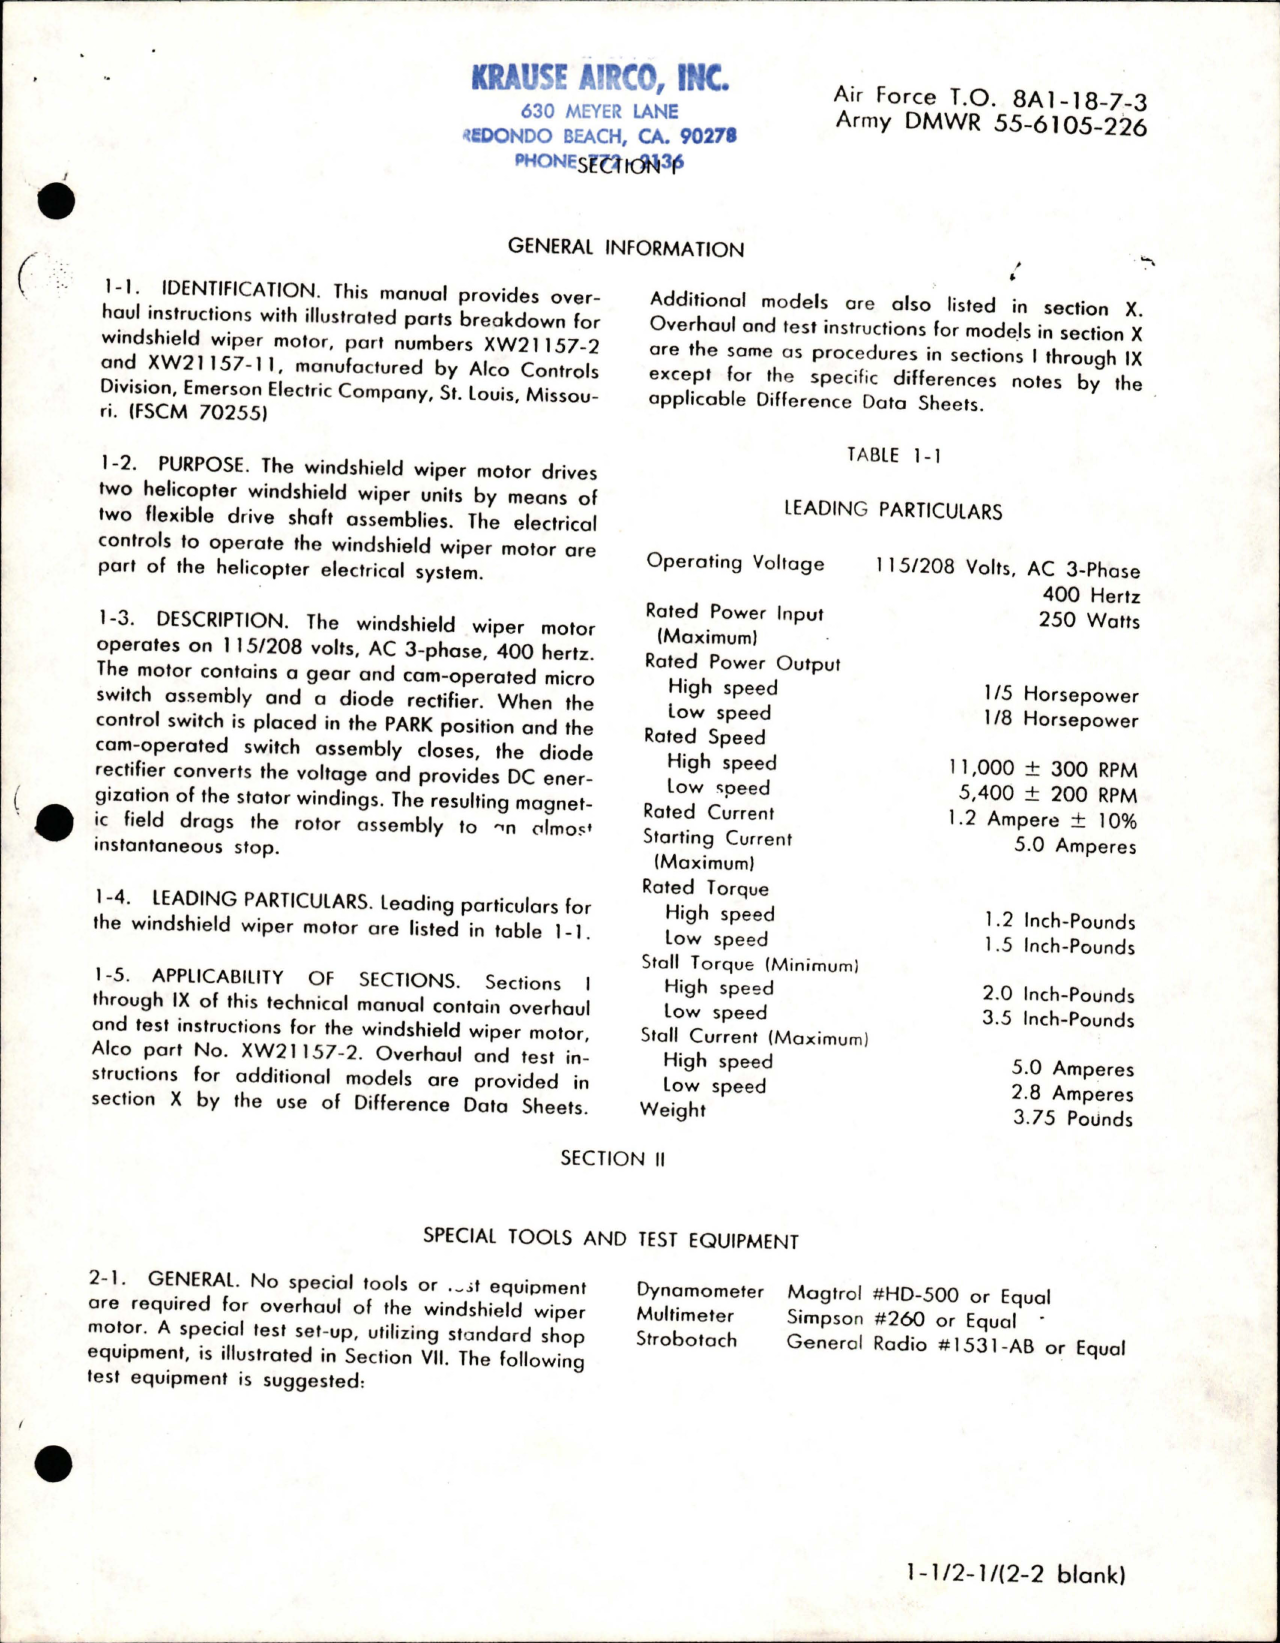 Sample page 5 from AirCorps Library document: Overhaul Instructions with Illustrated Parts Breakdown for Windshield Wiper Motor - Part XW21157-2 and XW21157-11 